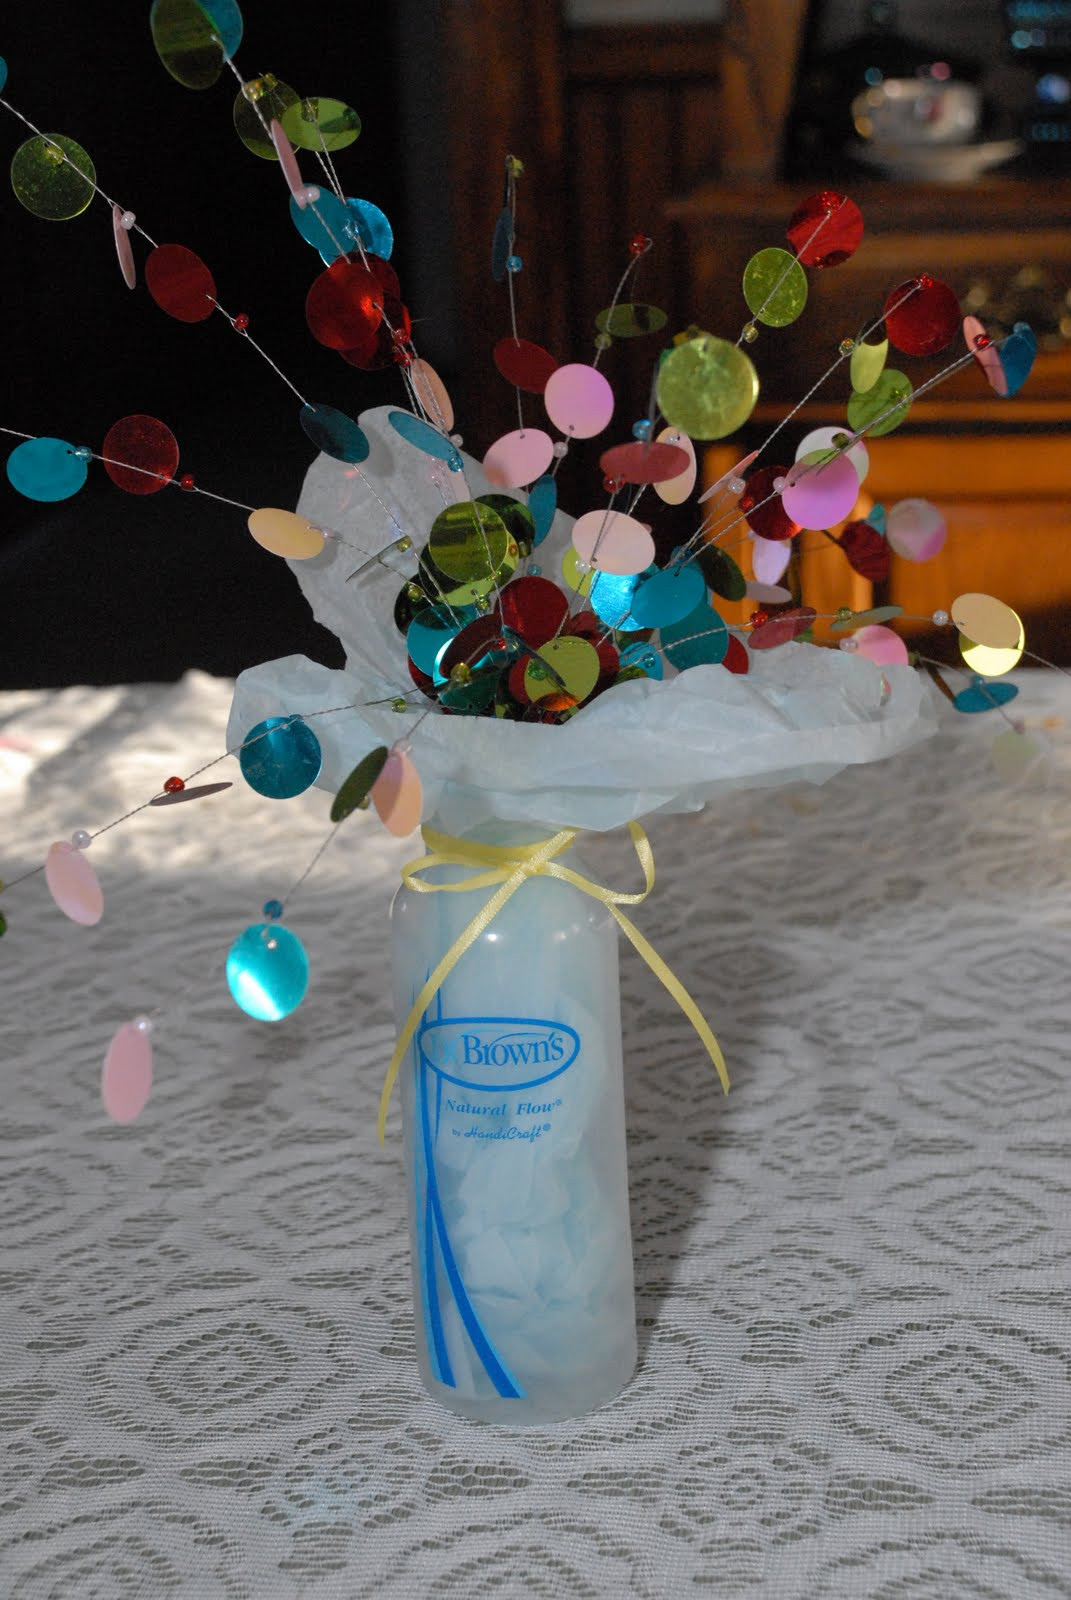 DIY Baby Shower Centerpieces
 Life More Simply DIY Frugal and Green Centerpieces for a